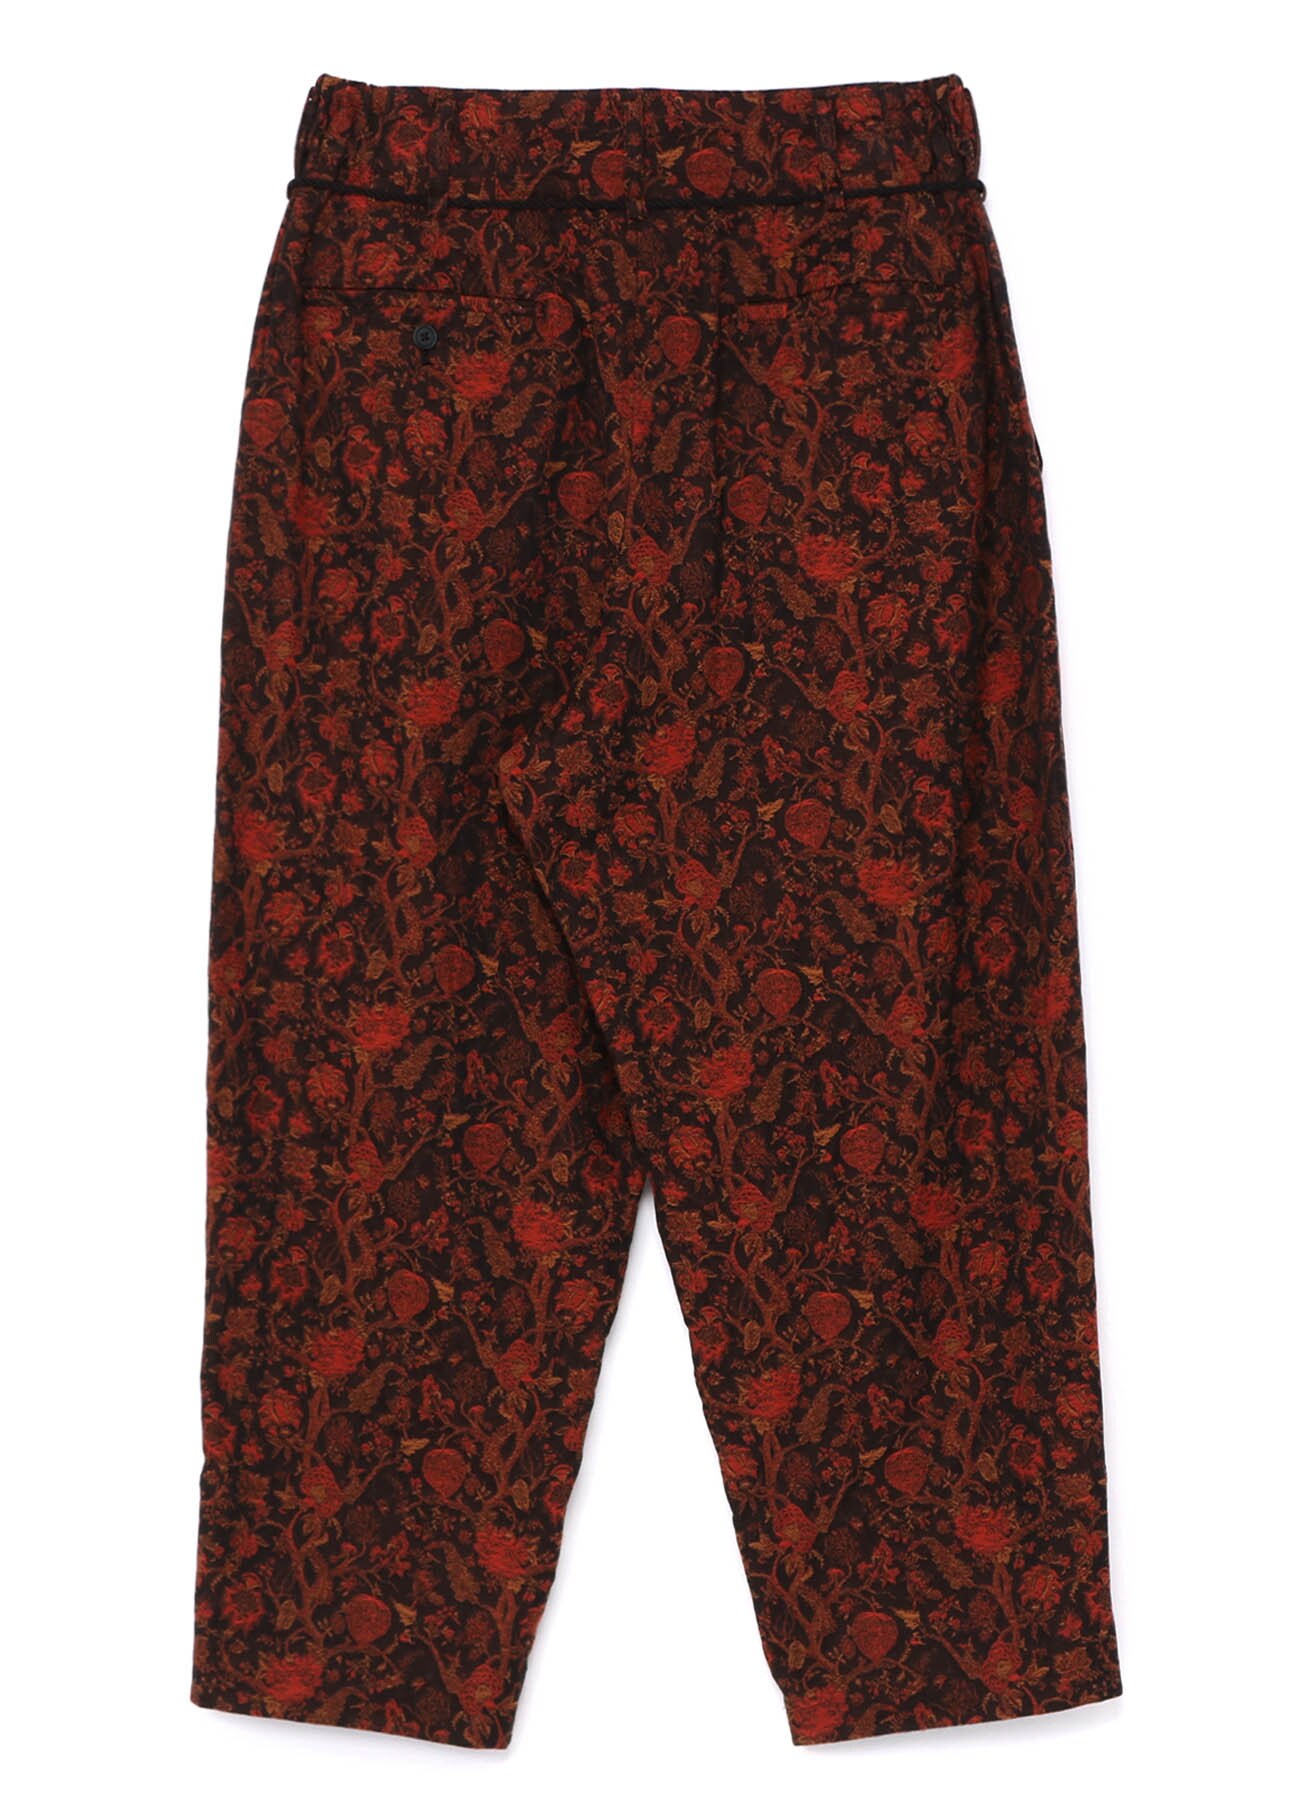 Cotton/Thorny Jacquard with Separate Hem Fabric Switching 2 Tuck pants